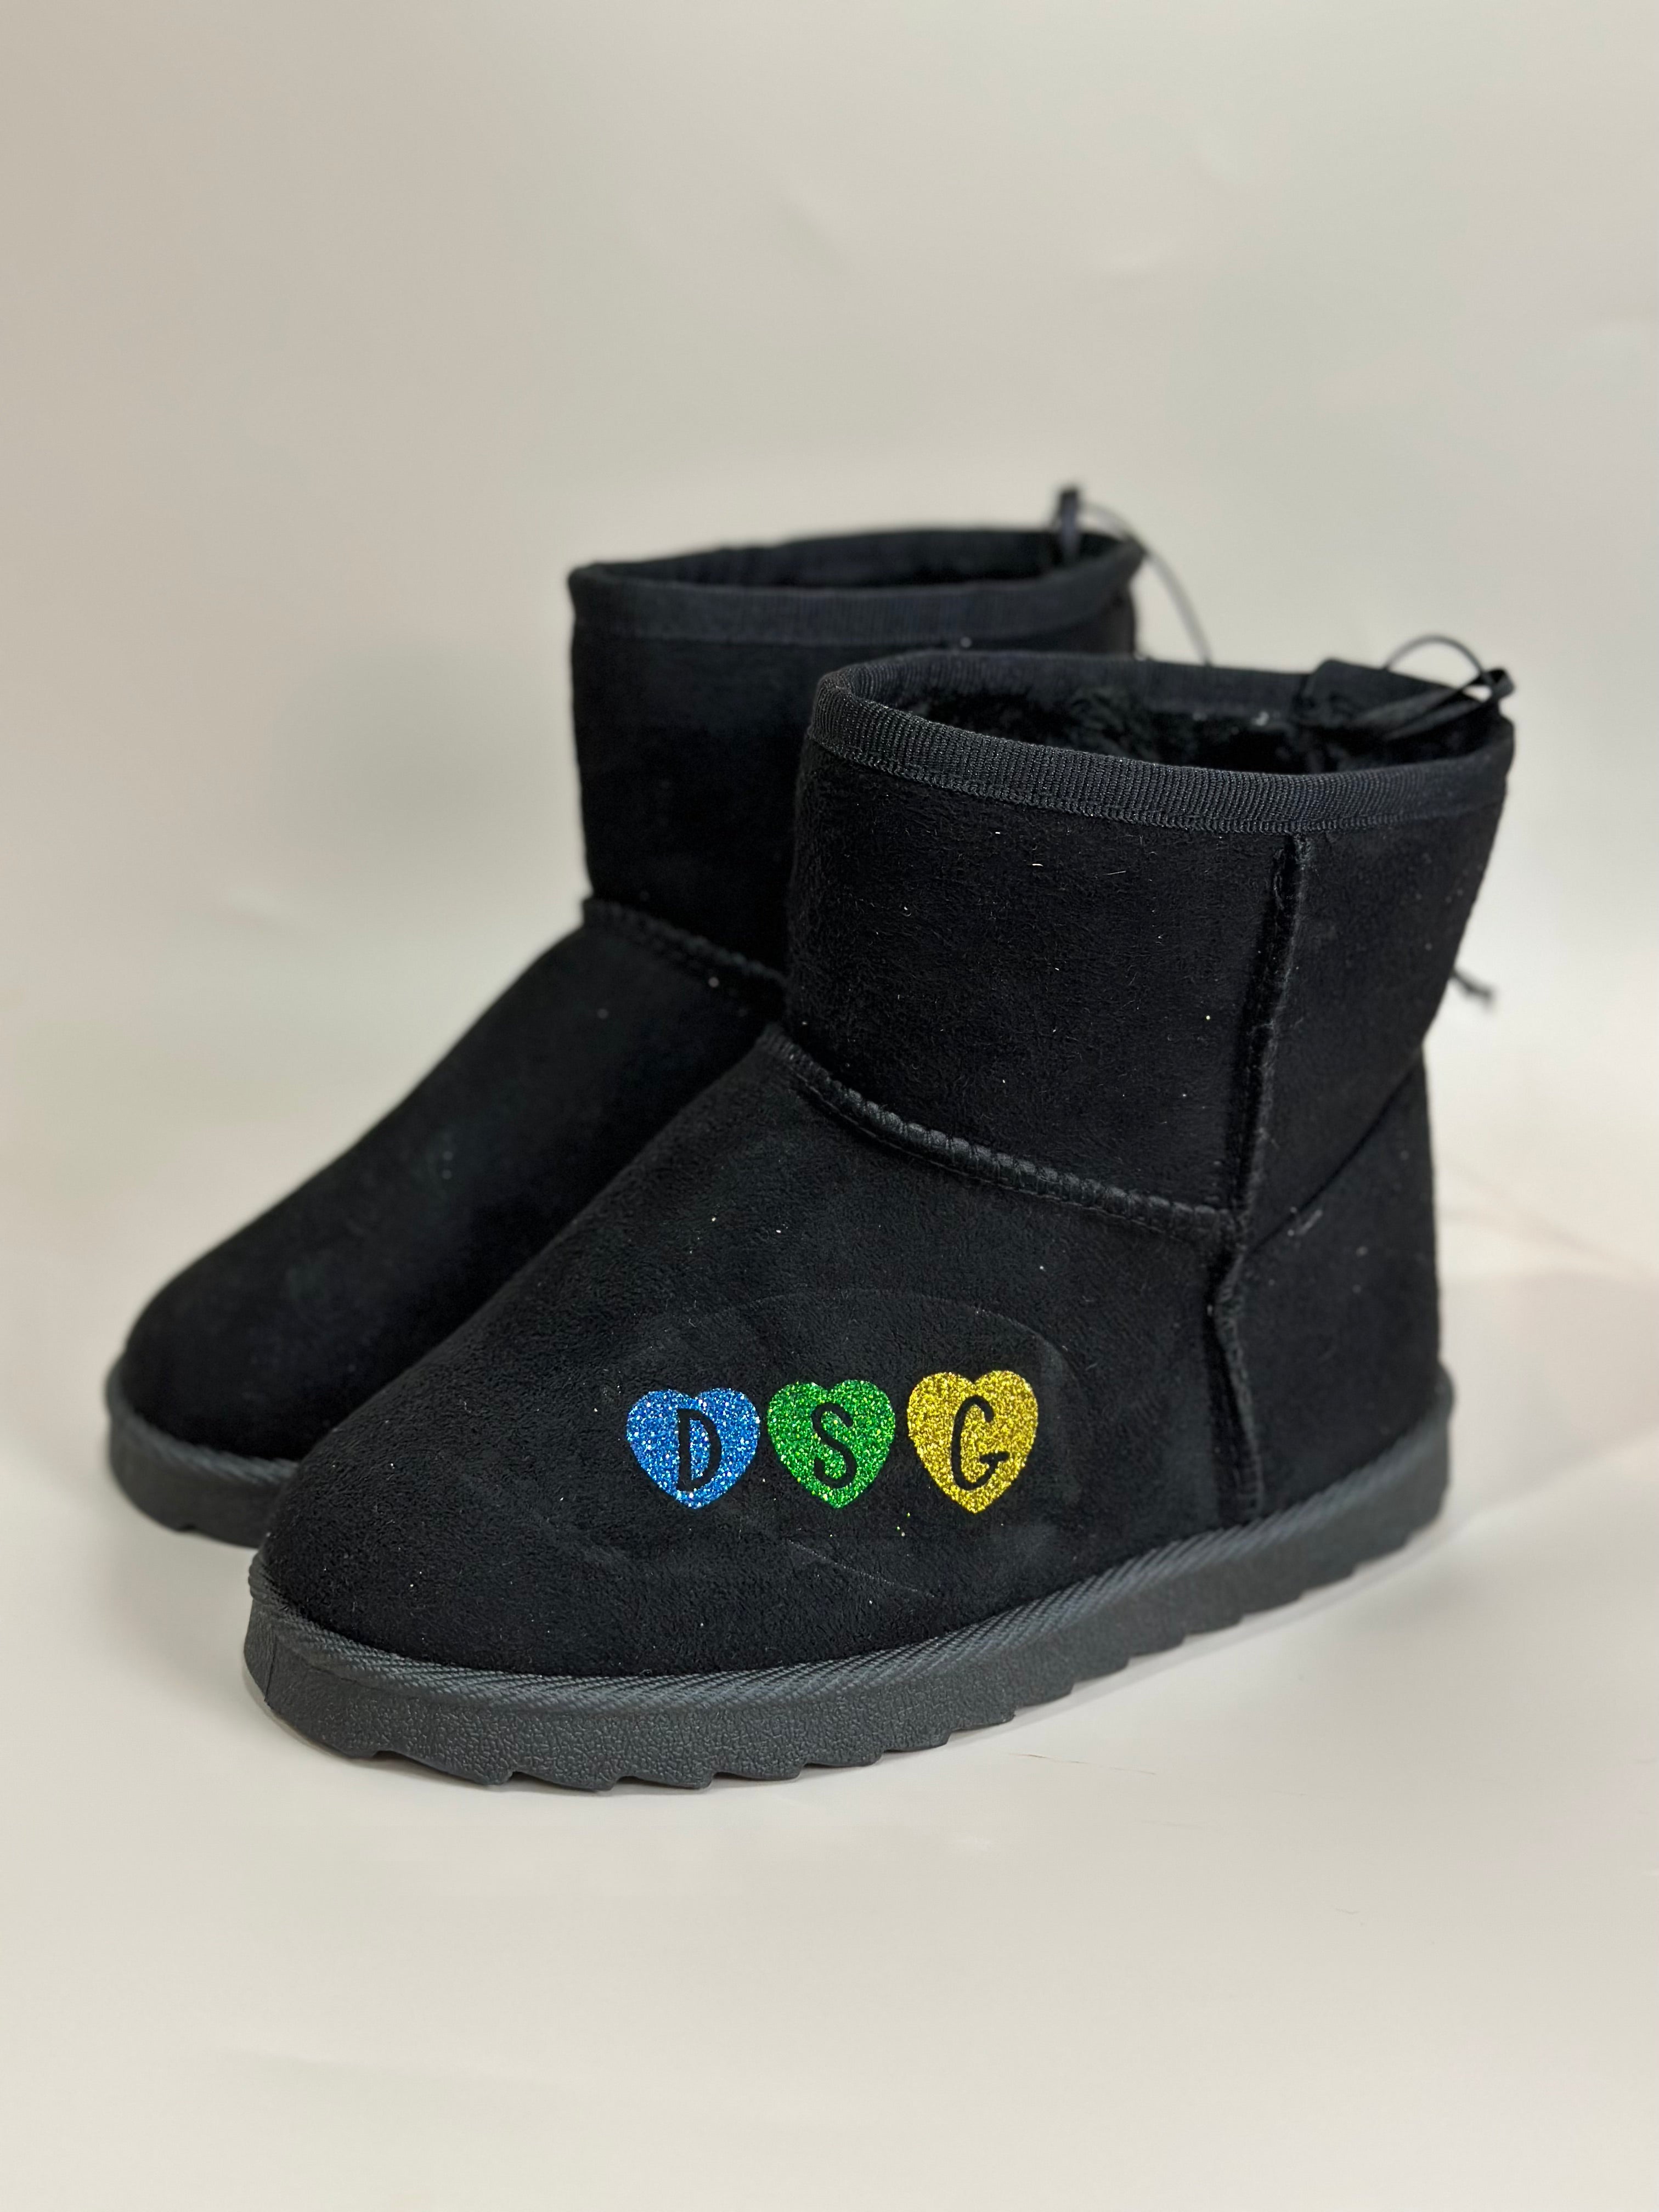 Slipper Boots - Personalised